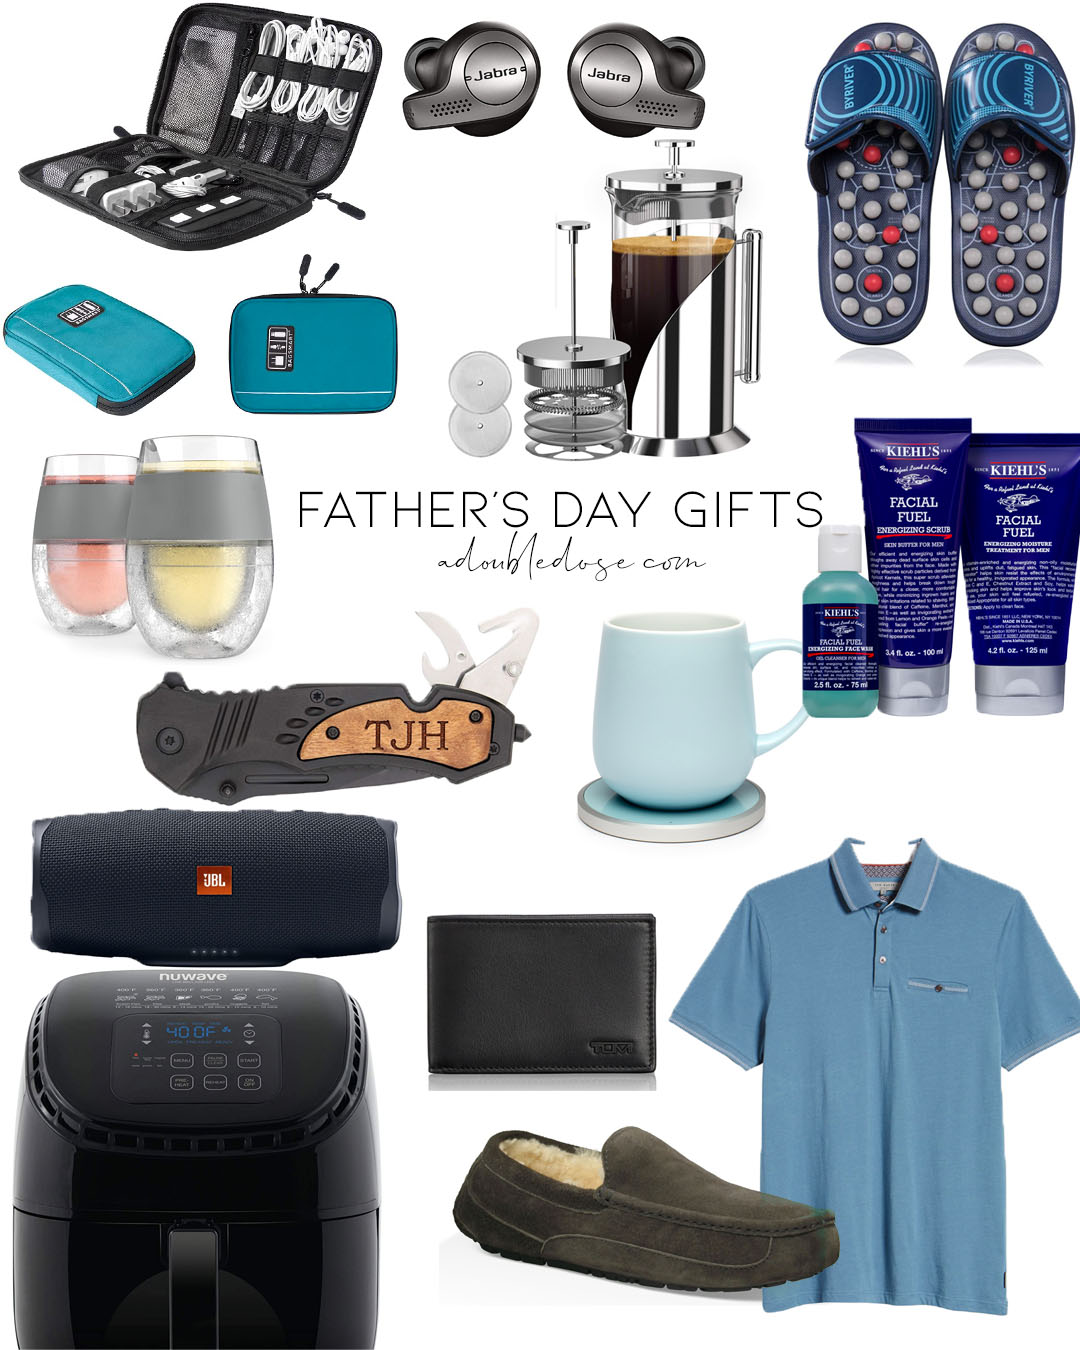 lifestyle and fashion blogger alexis belbel sharing fathers day gifts mug warmer, ugg slippers, bluetooth speaker, air fryer, french press | adoubledose.com